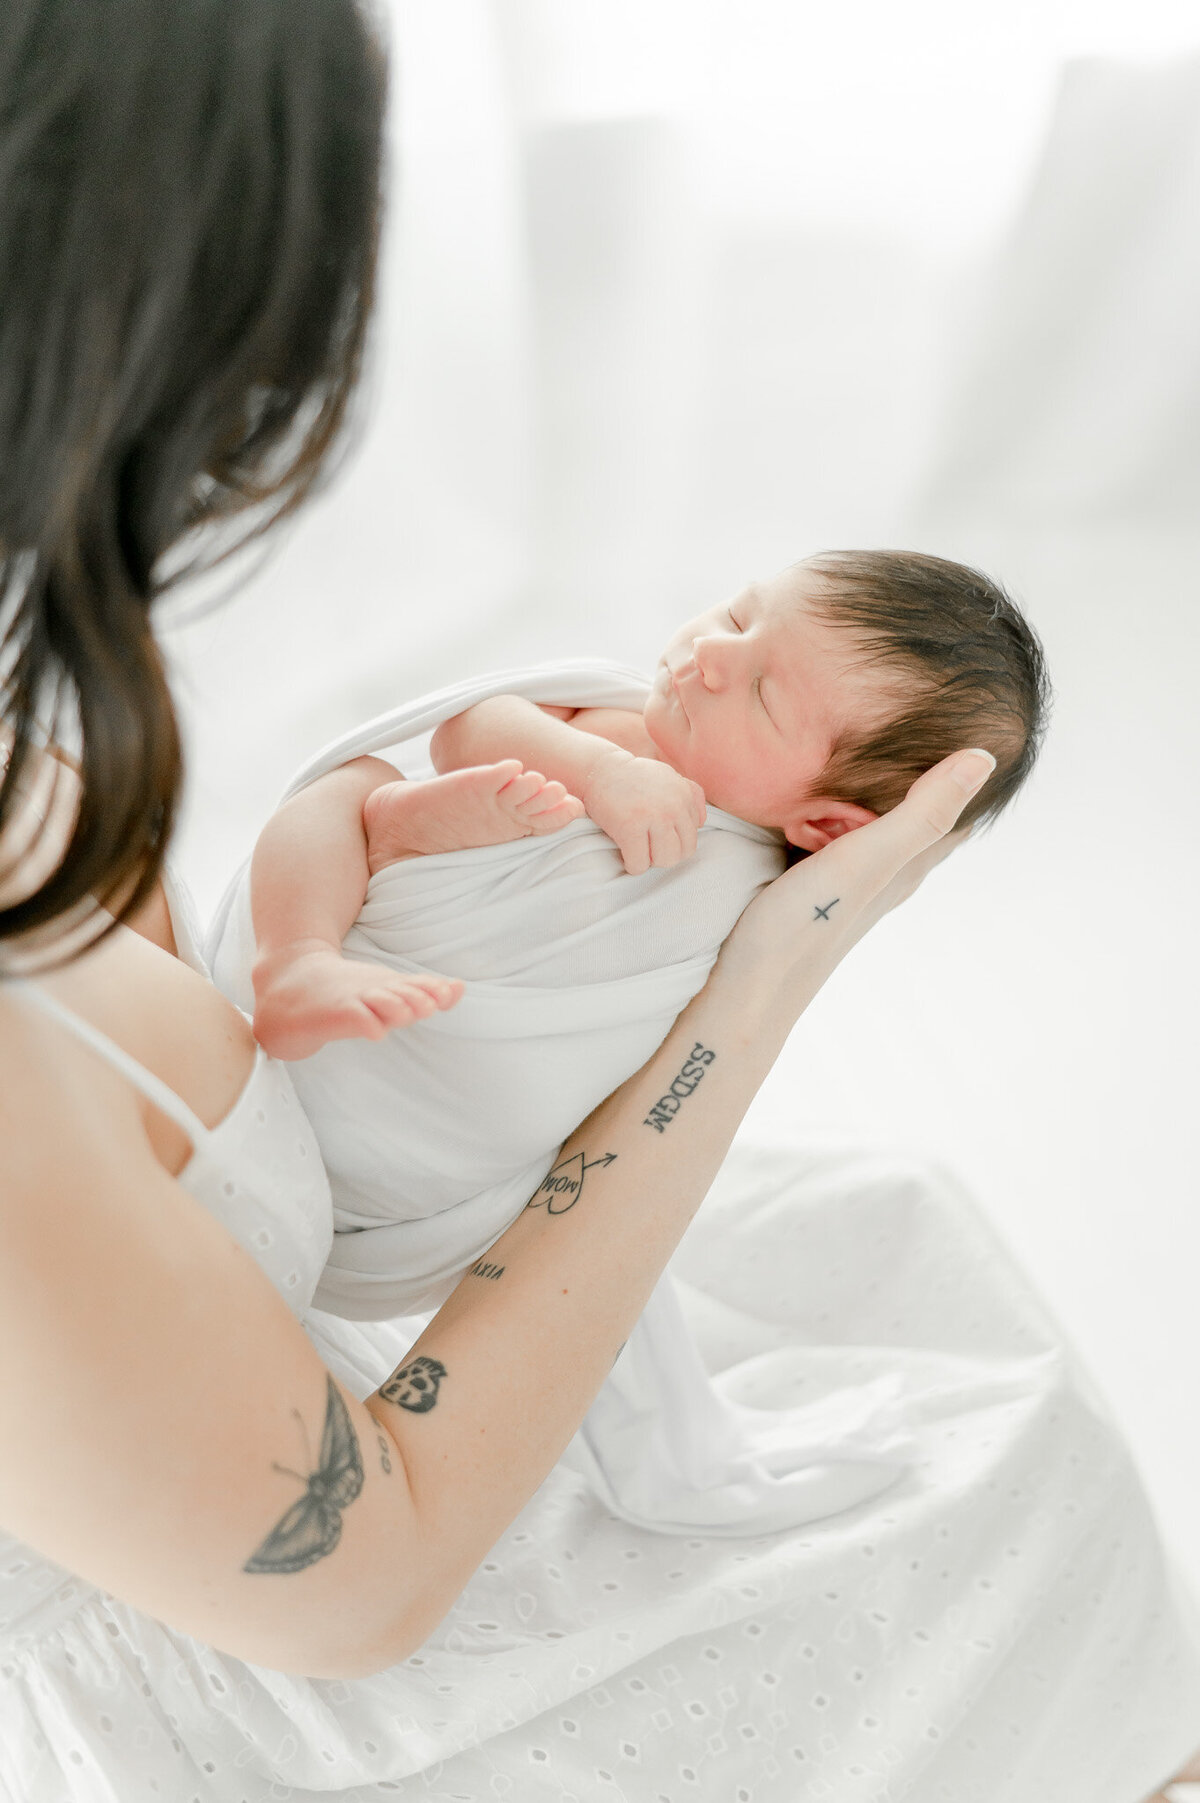 Baby sleeps in her mother's arms with tattoos